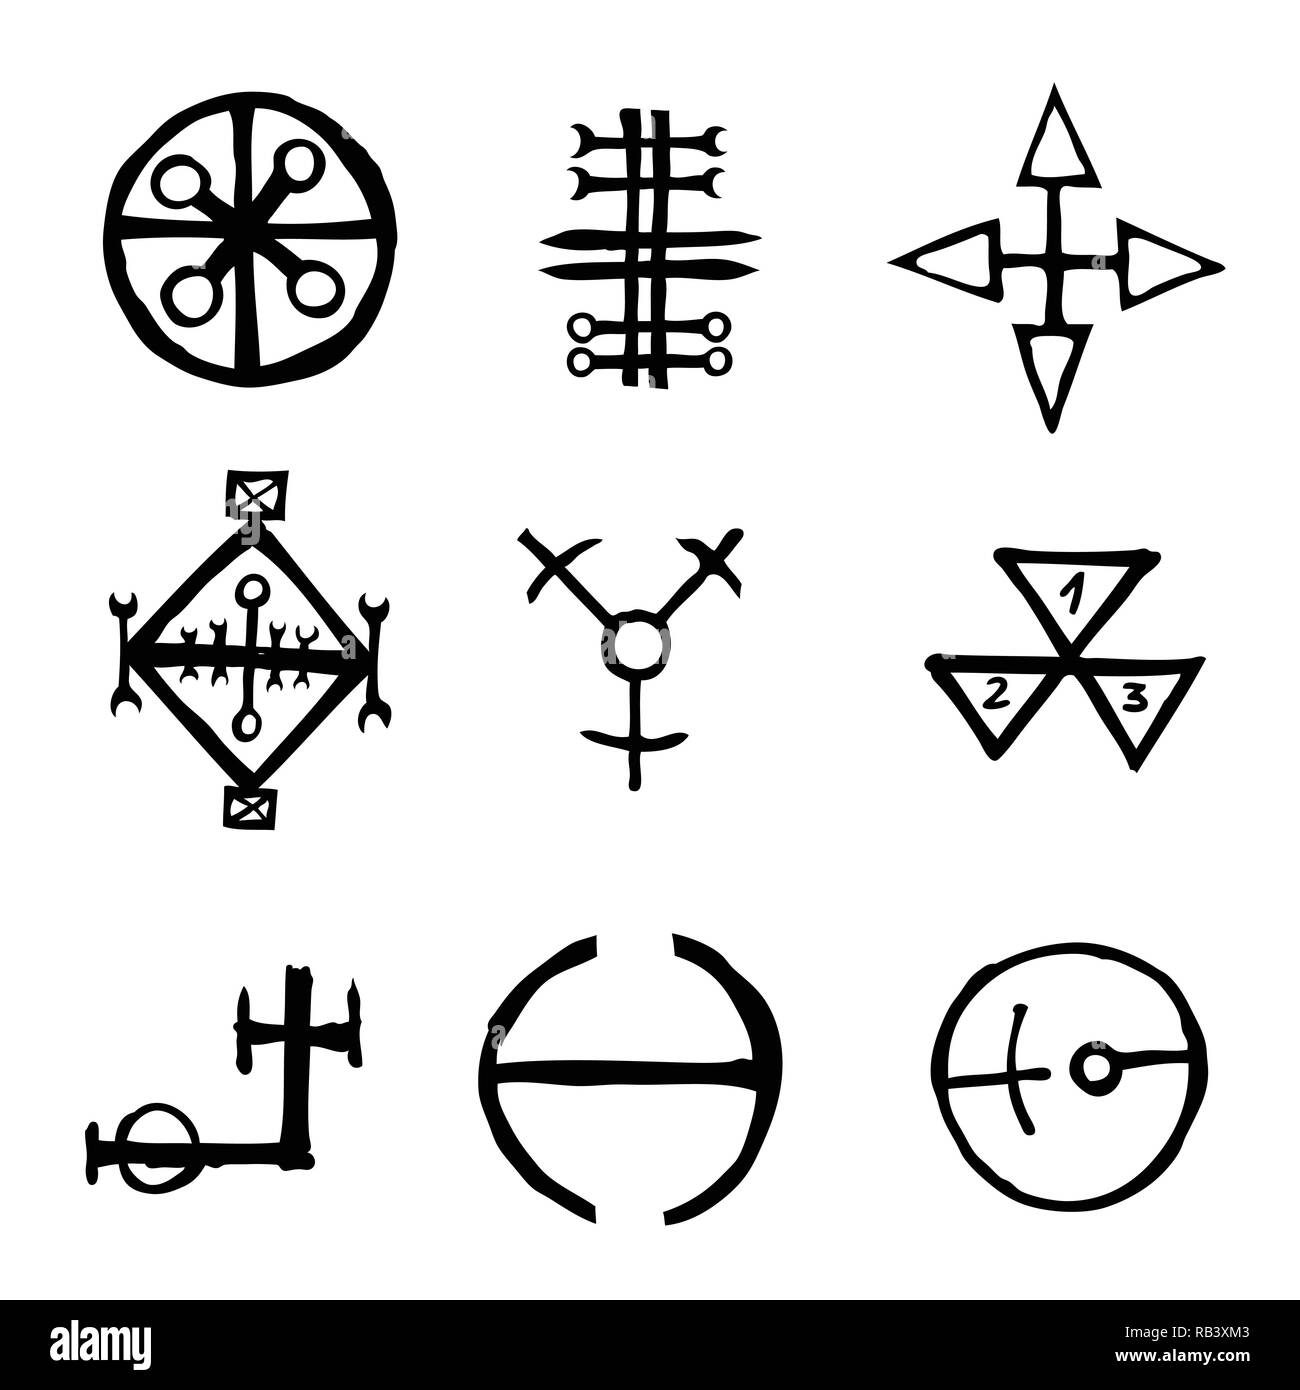 Set of icons and symbols letters inspired on the theme of magic and witch craft occult alchemy, mystic, esoteric religion and mason, isolated. Tattoos Stock Vector